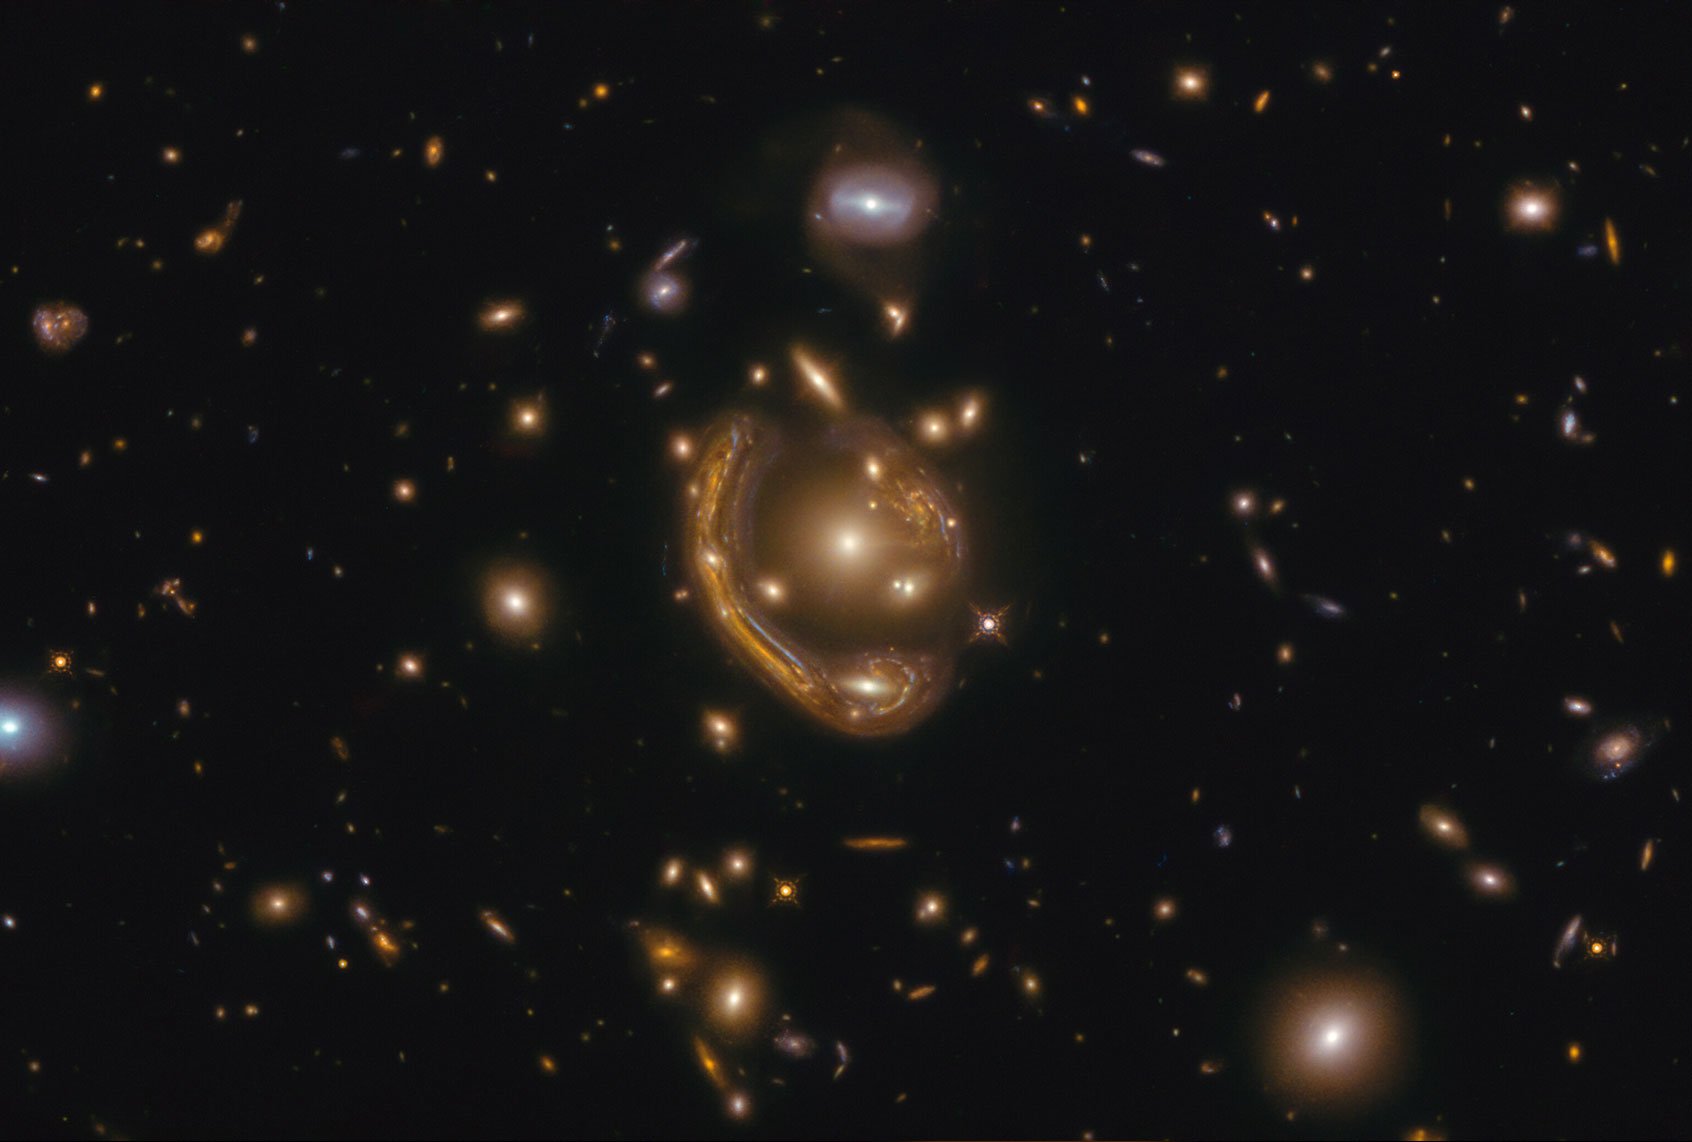 What was the “melted ring” that Hubble saw?